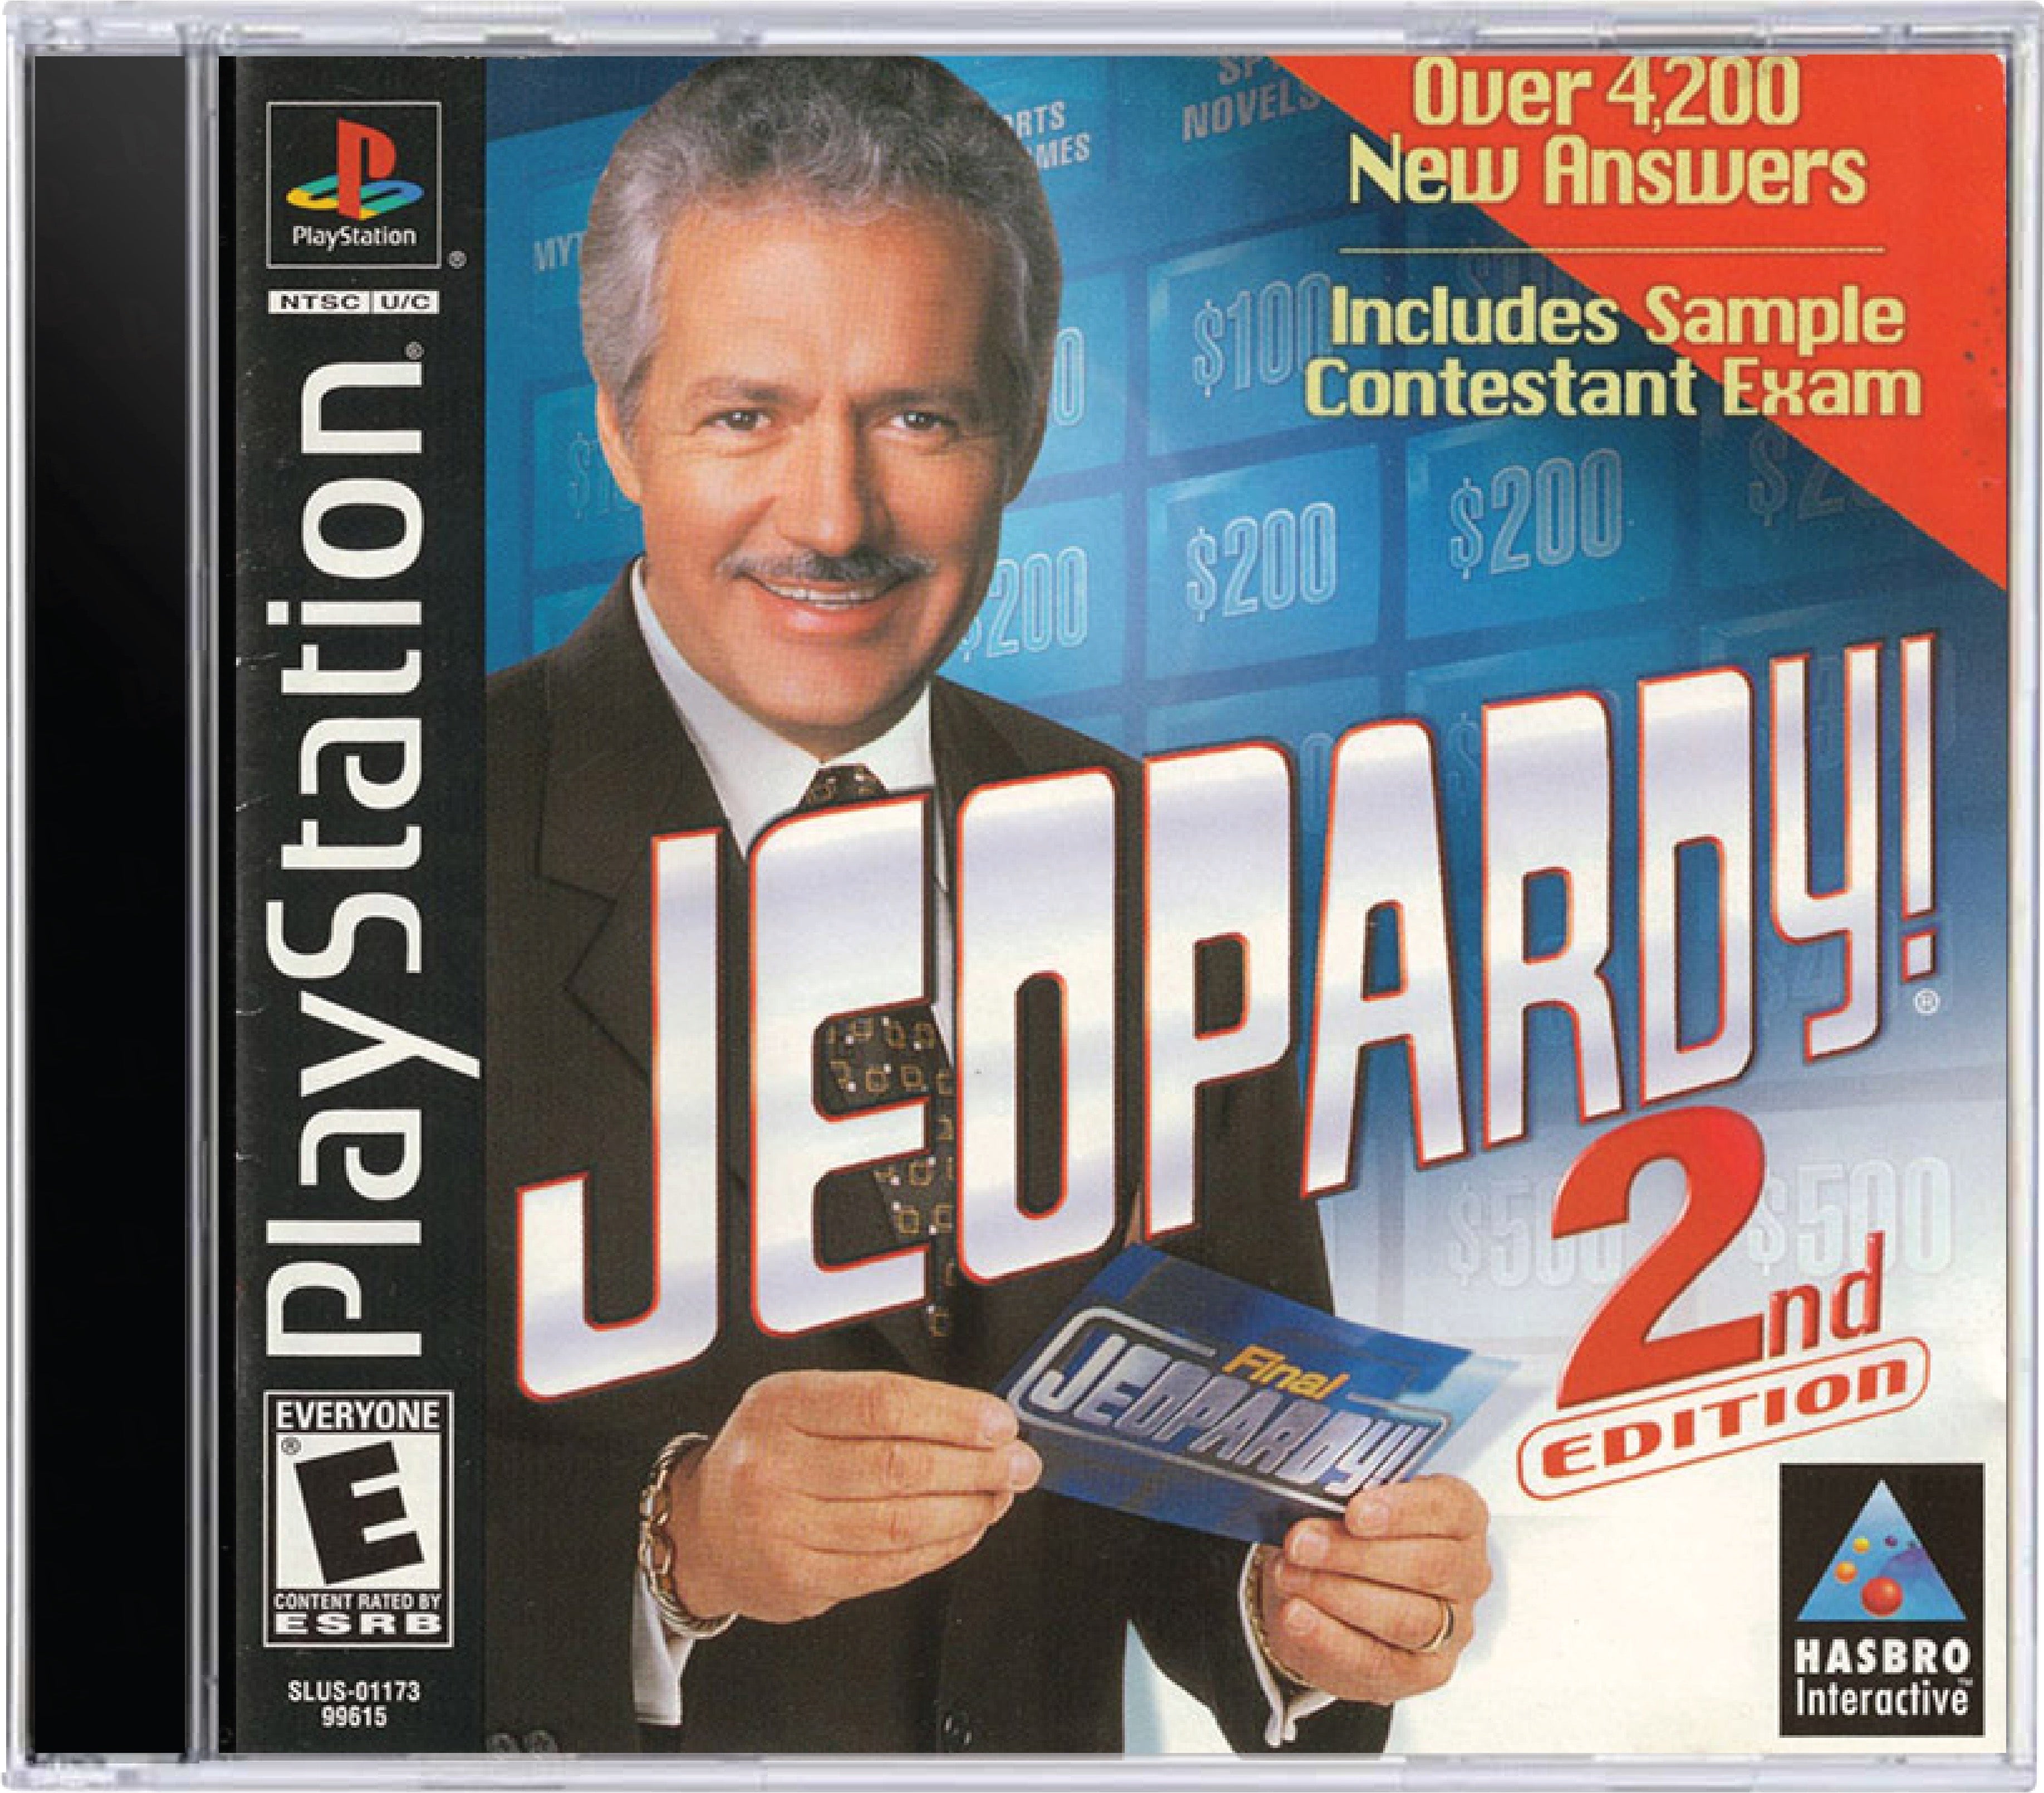 Jeopardy 2nd Edition Cover Art and Product Photo